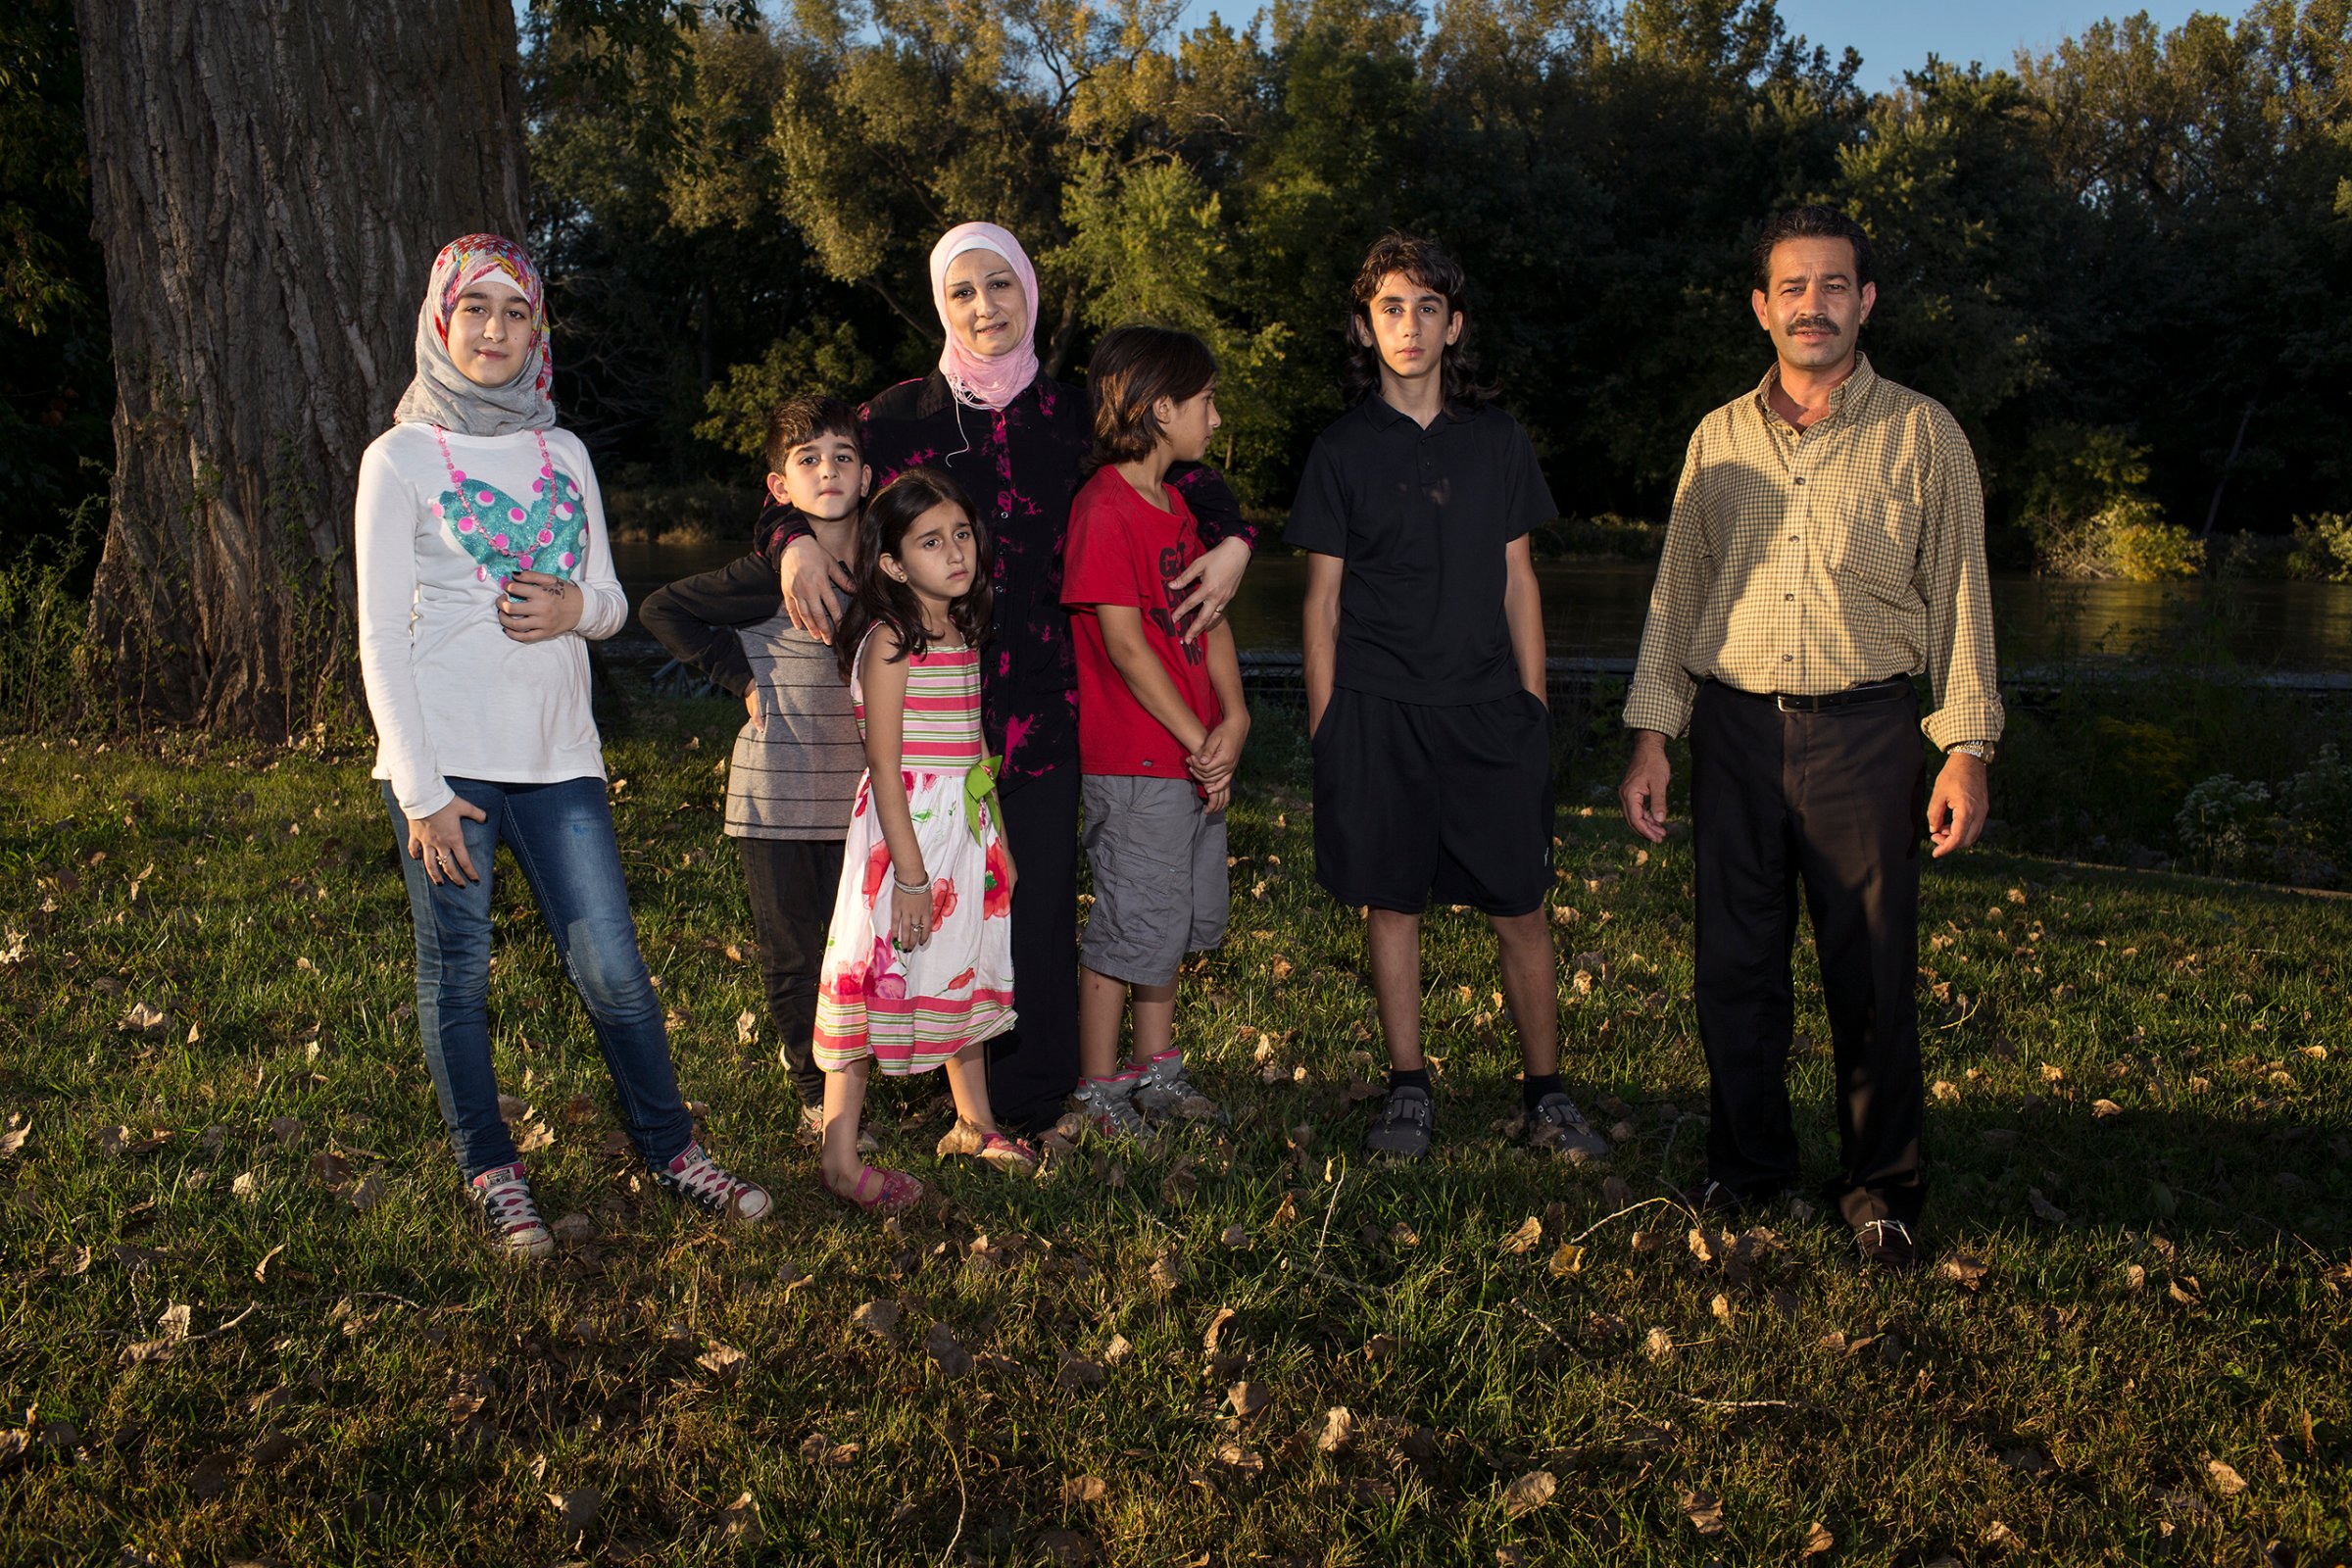 Ghazweh and Abdul Fattah at a park in Des Moines in 2016 with their children, from left to right: Sedra, Mutaz, Hala, Haidar and Nazeer. That year, the Tameems became the first Syrian refugee family to be resettled in Iowa. In the four decades of the U.S. refugee resettlement program, America has safely resettled more than three million of the world’s most vulnerable refugees with an average annual cap set at 95,000 prior to the Trump administration.